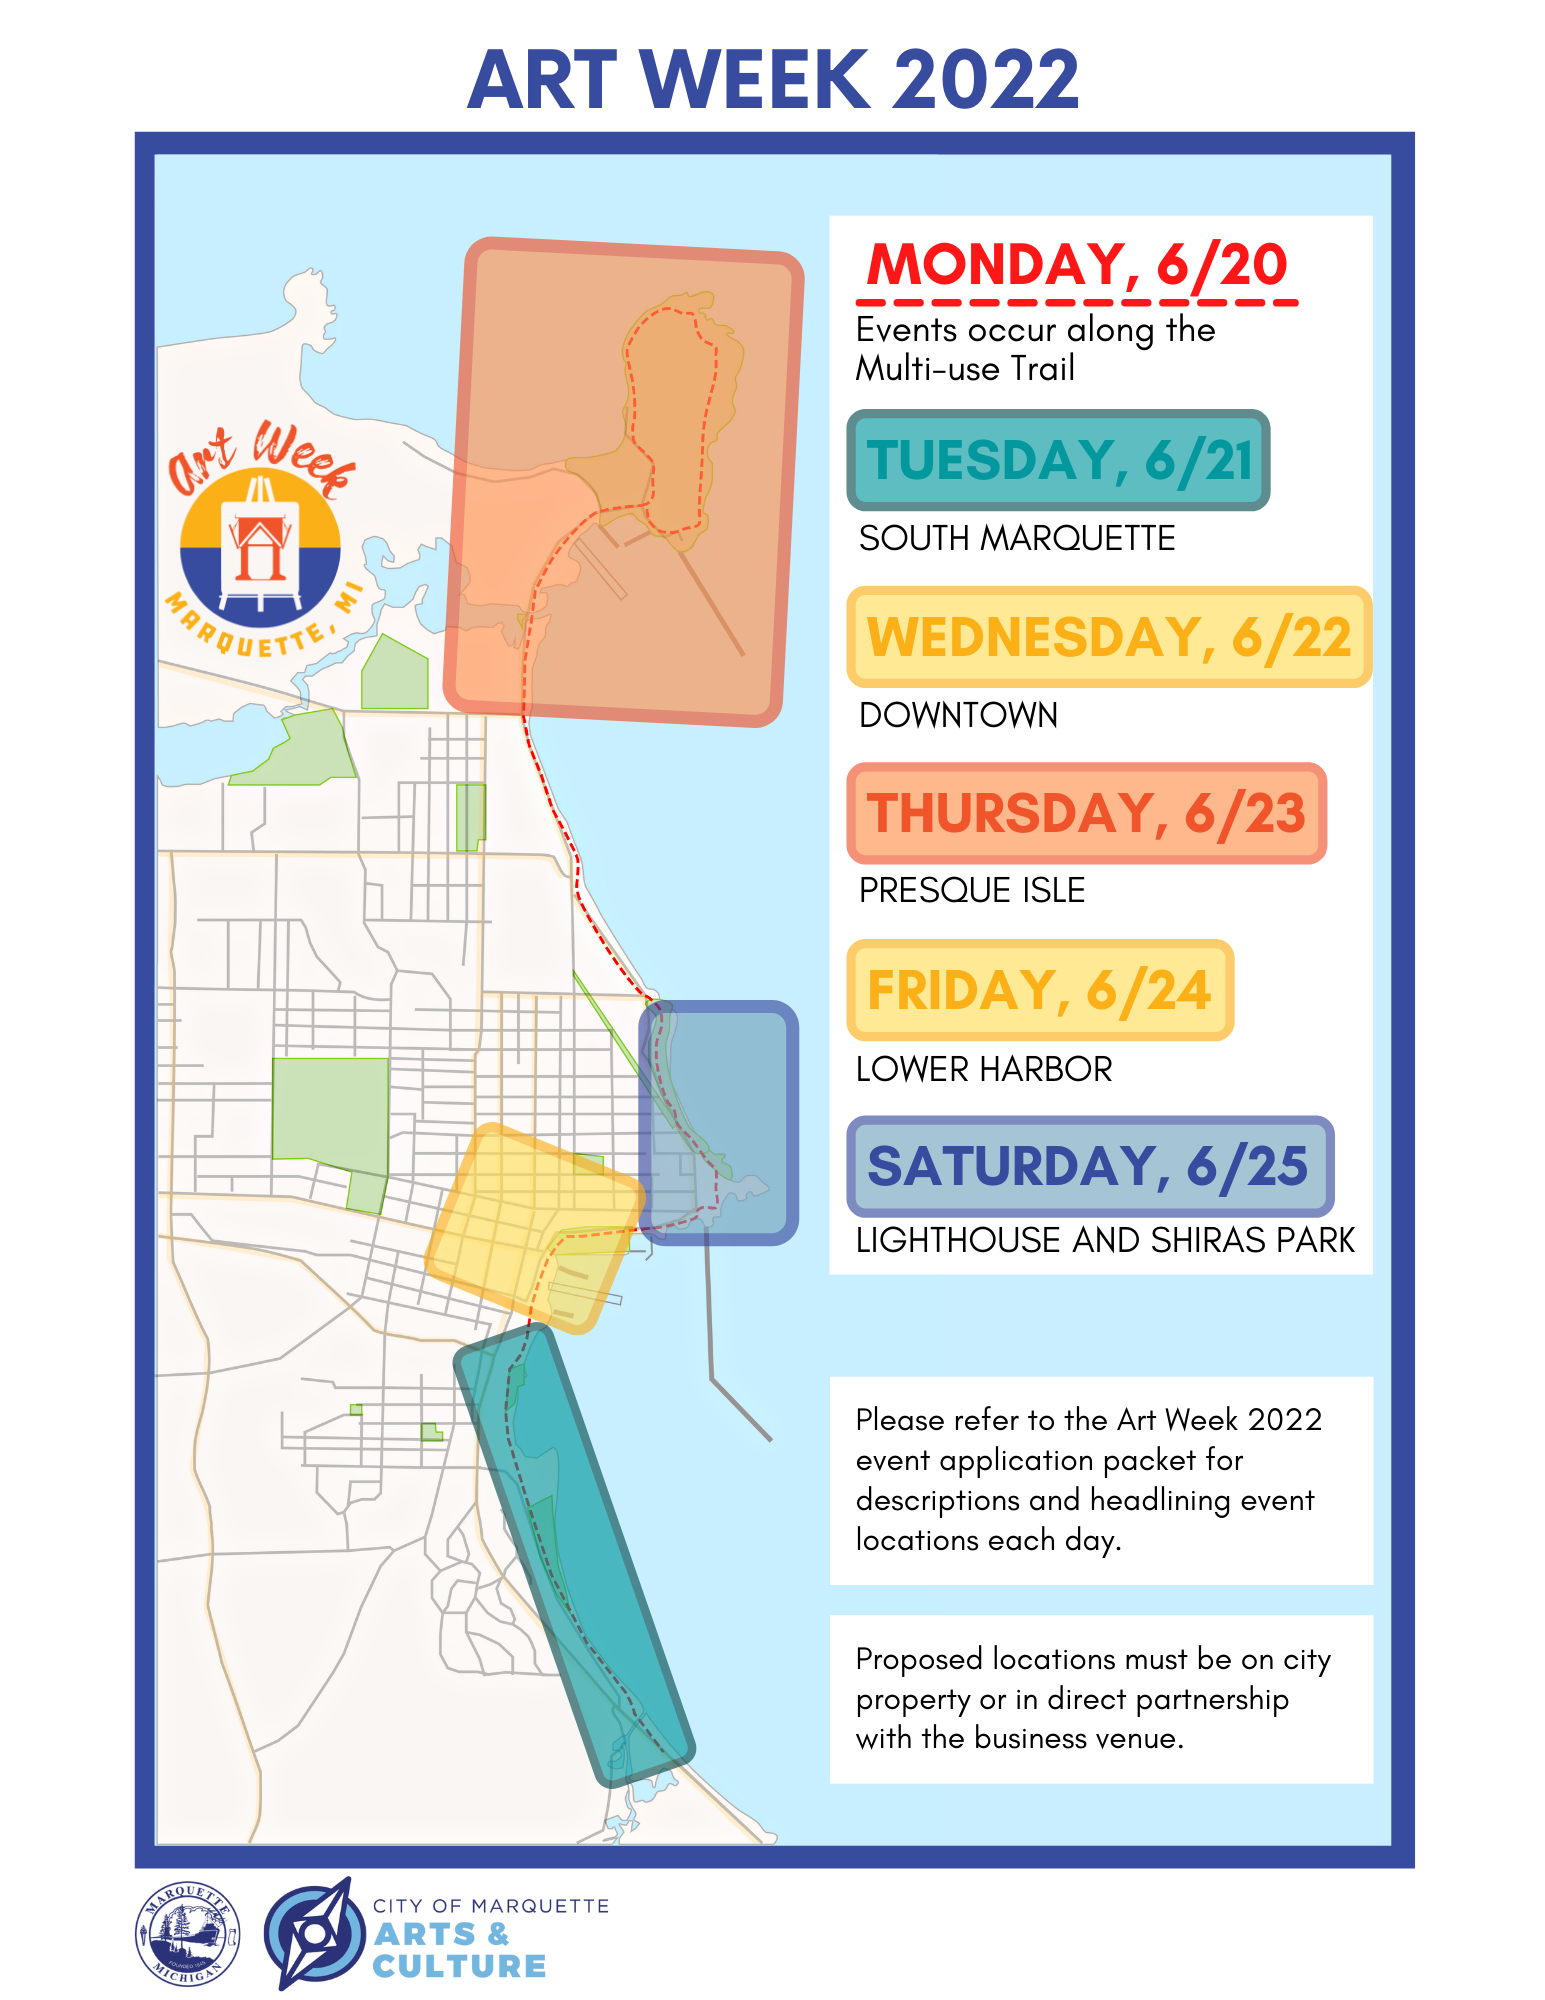 Art Week Map, Monday Entire Lakeshore, Tuesday south Marquette, Wednesday downtown, Thursday Presque Isle, Friday Lower Harbor, Saturday lighthouse to picnic rocks